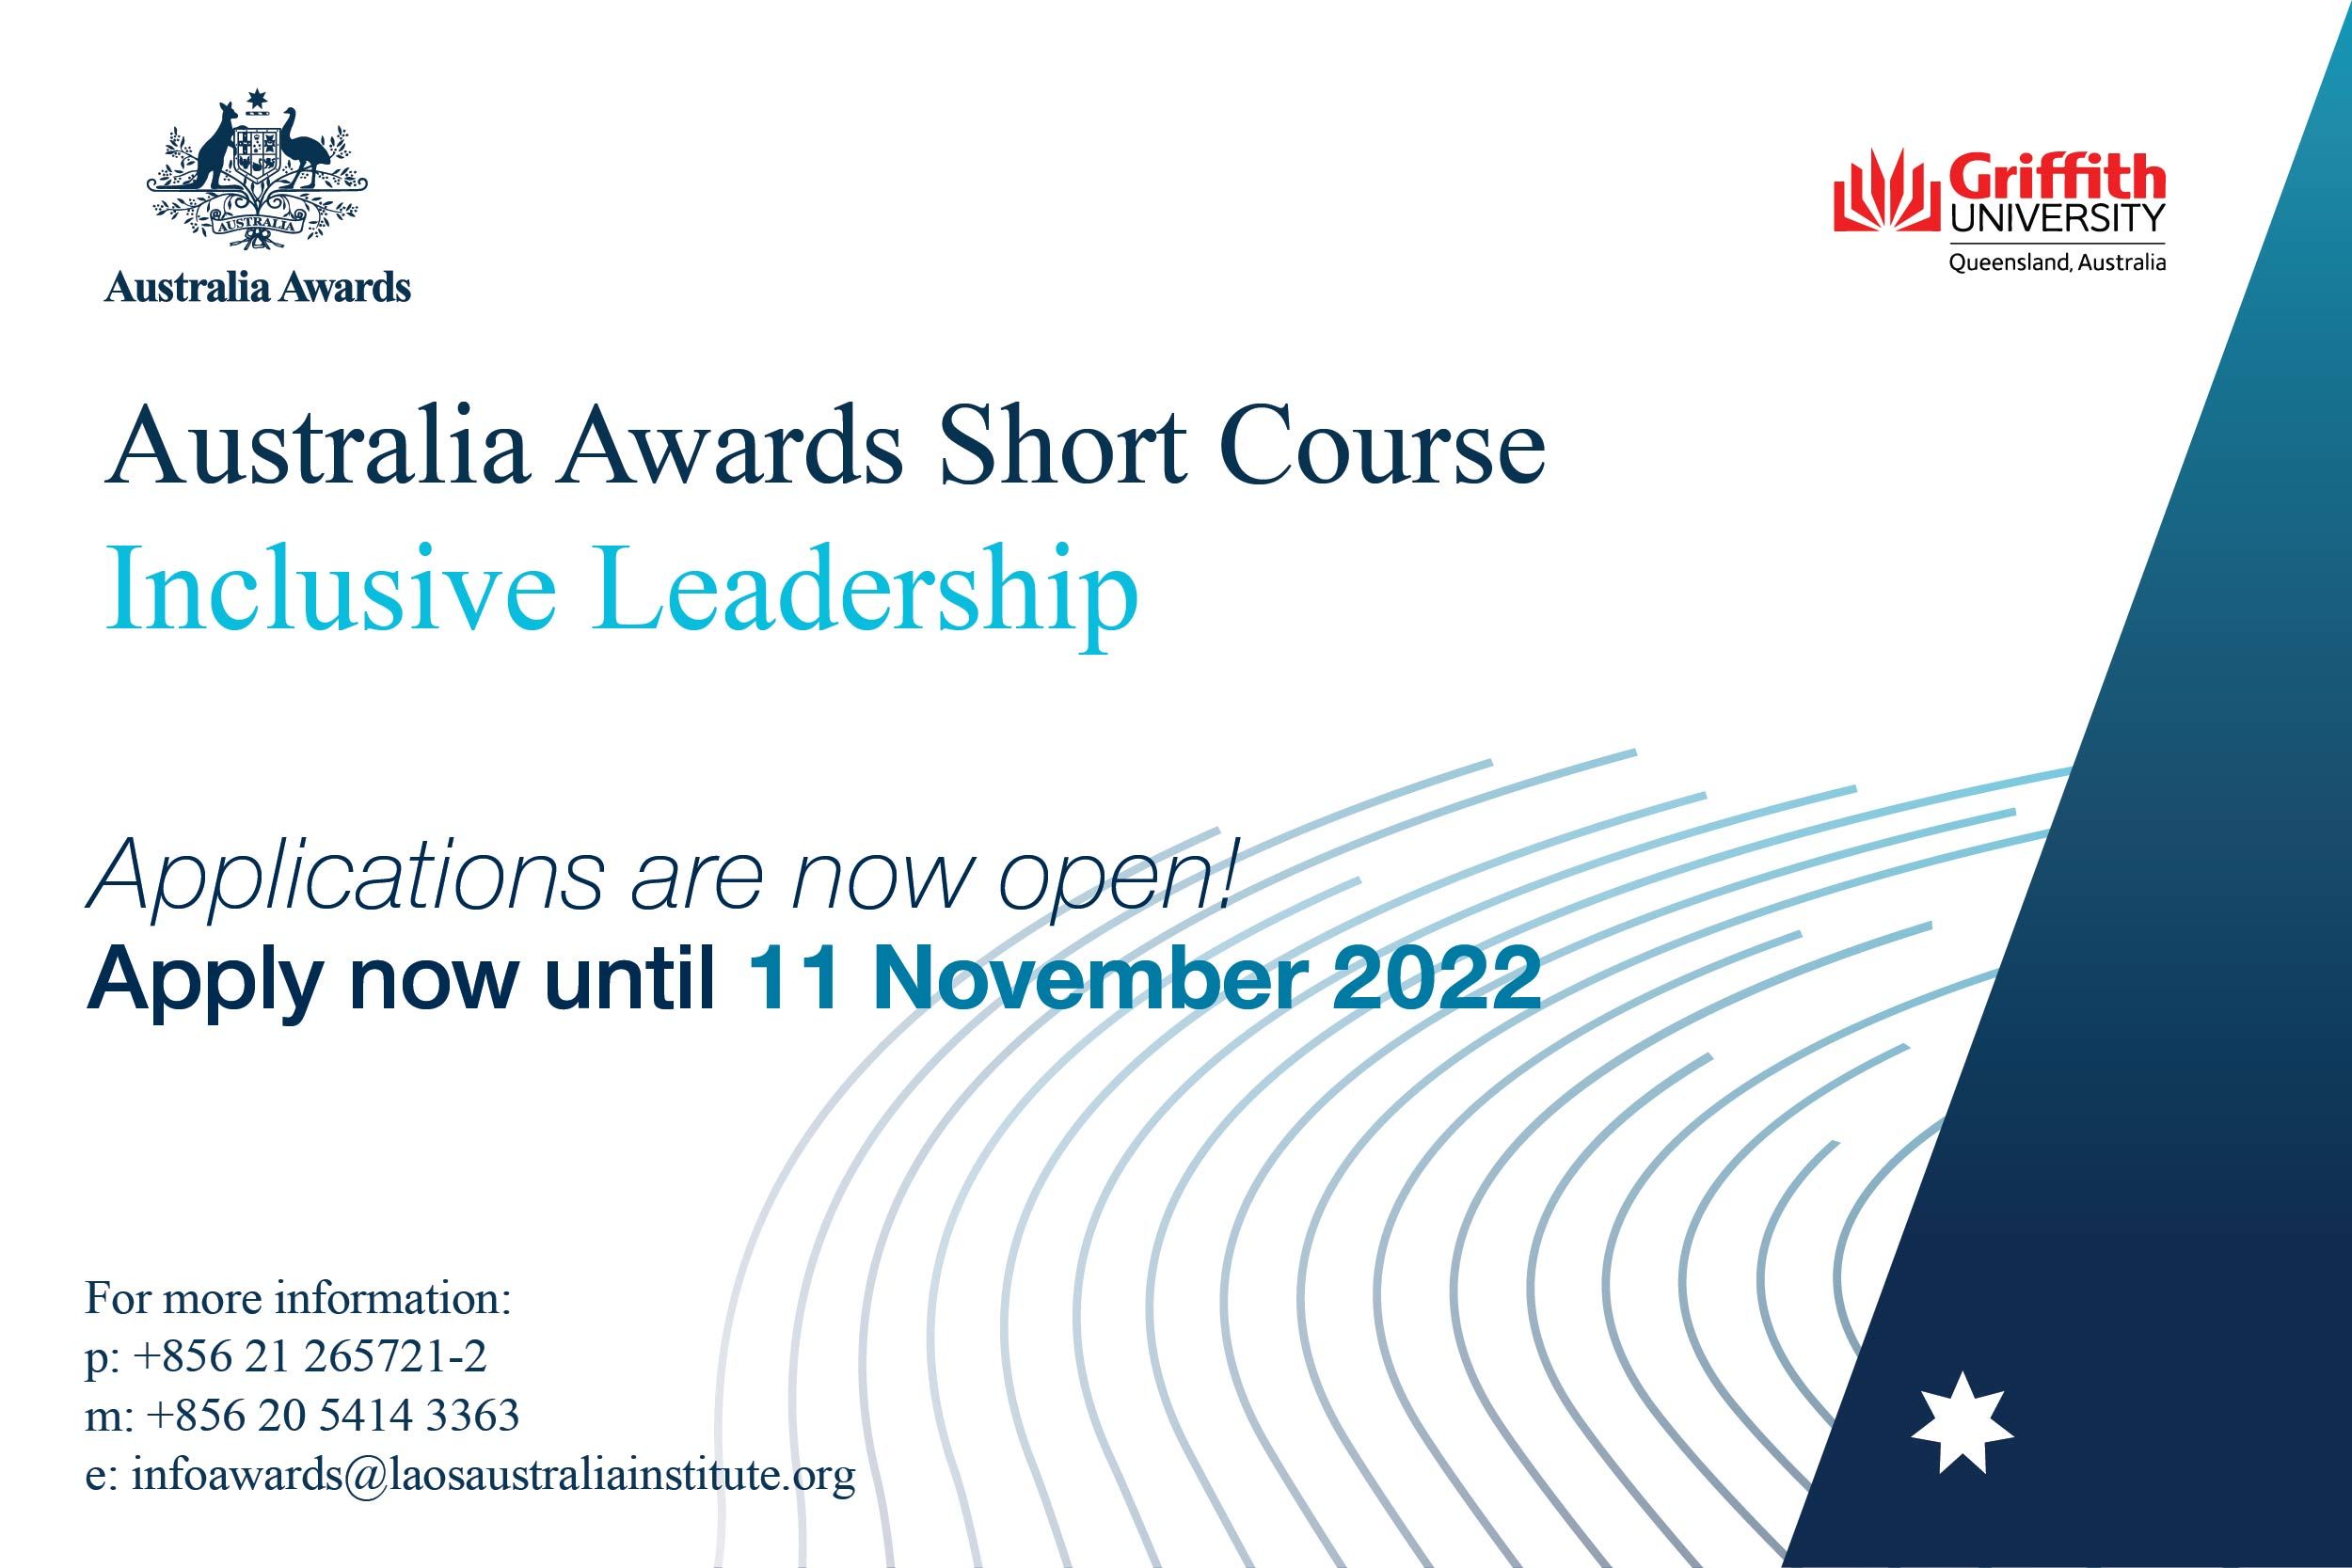 Are you ready to improve your Inclusive Leadership Skills?